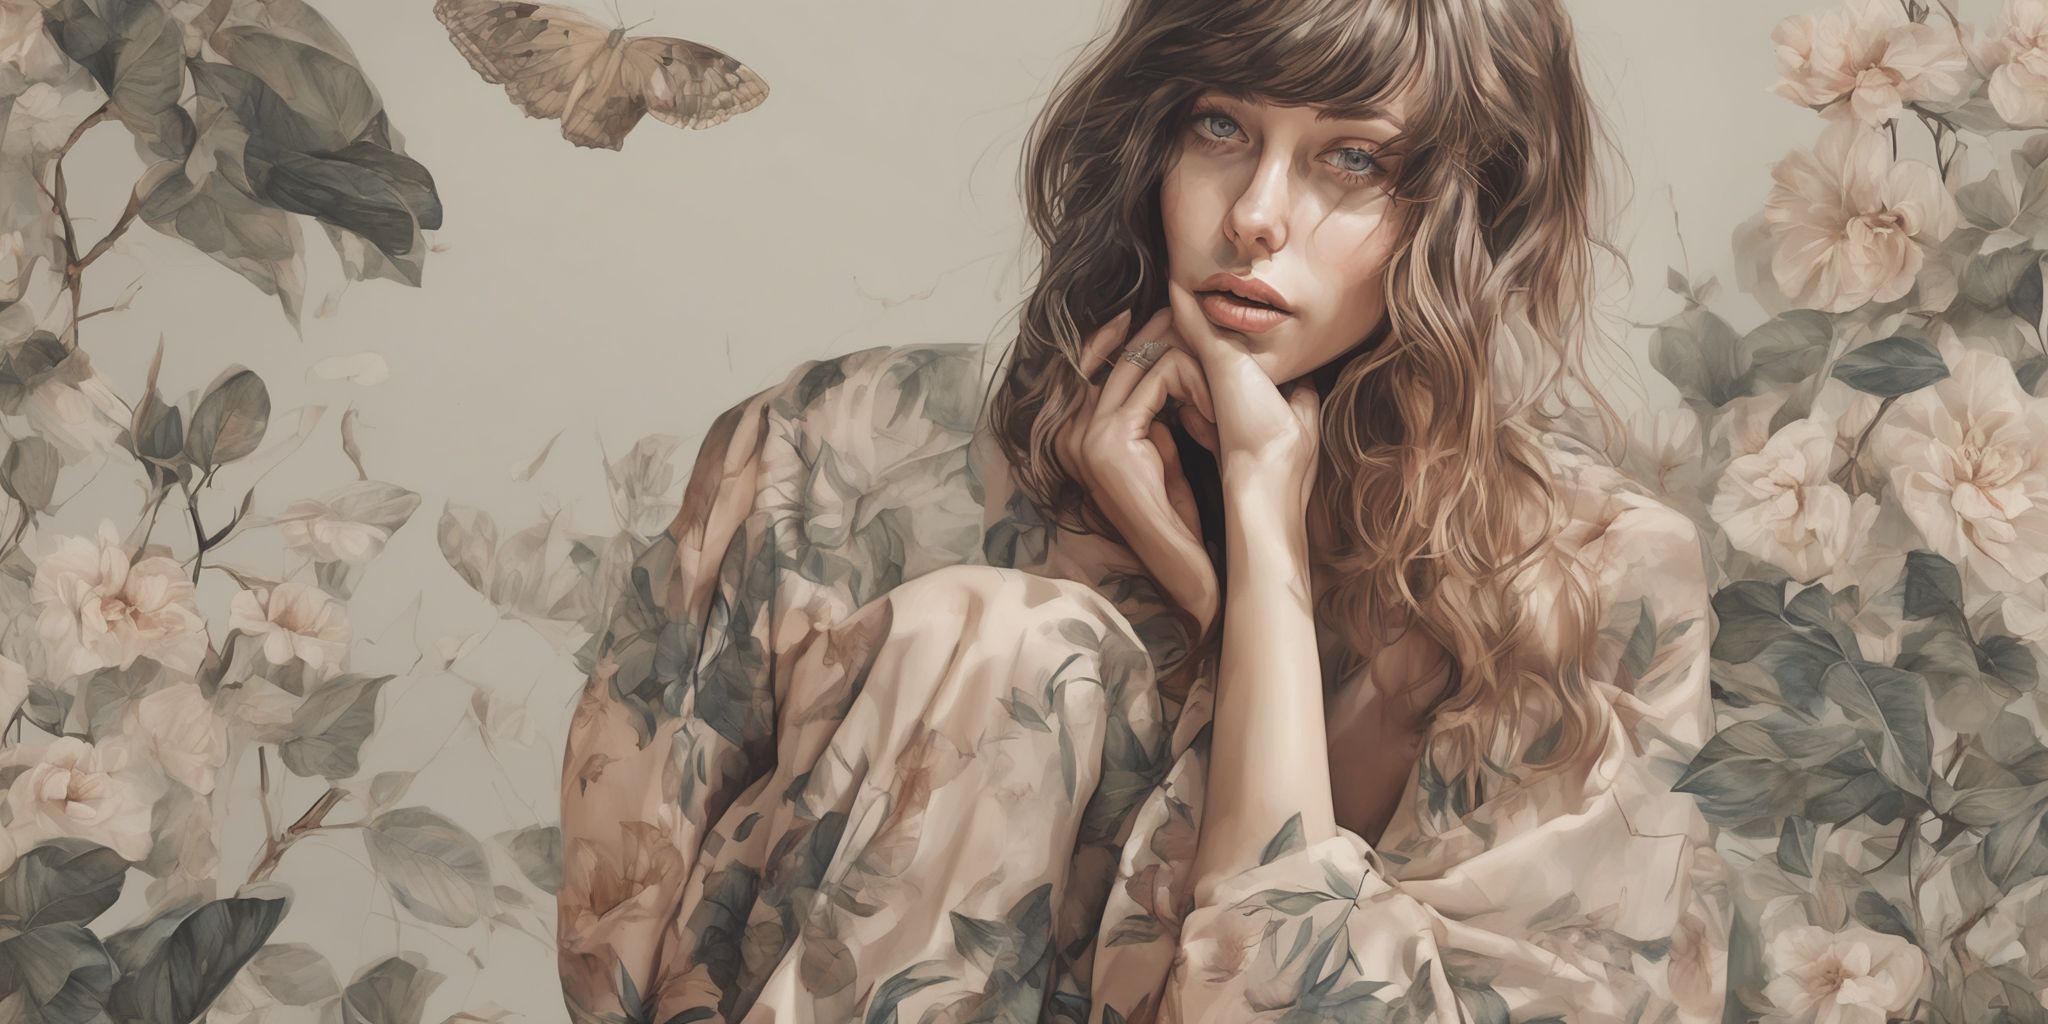 Illustrations  in realistic, photographic style